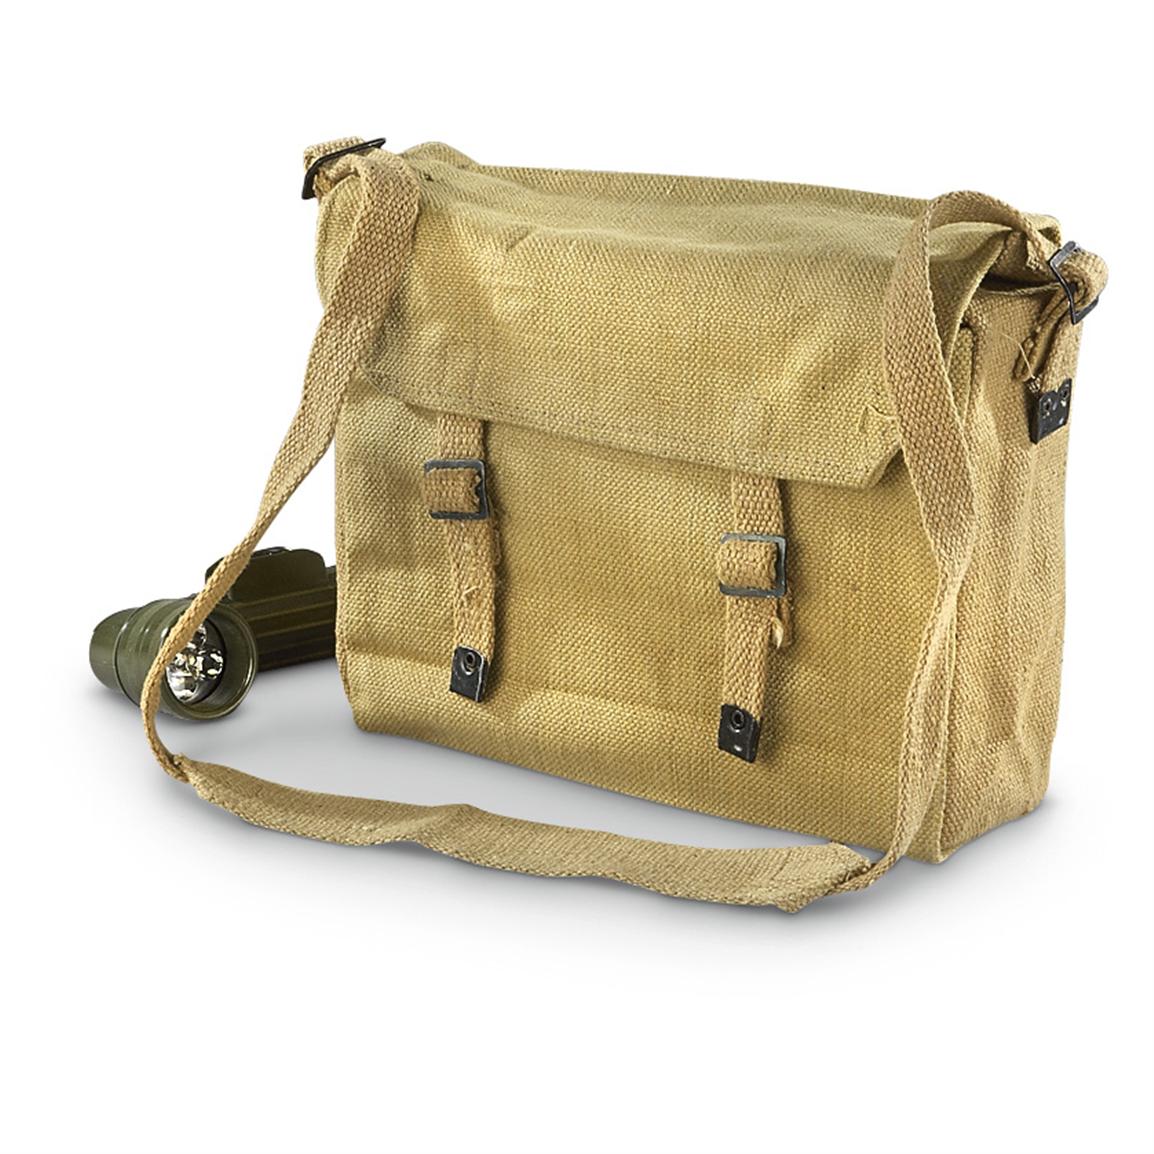 Tactical Military-style Shoulder Bag - 596567, Military 